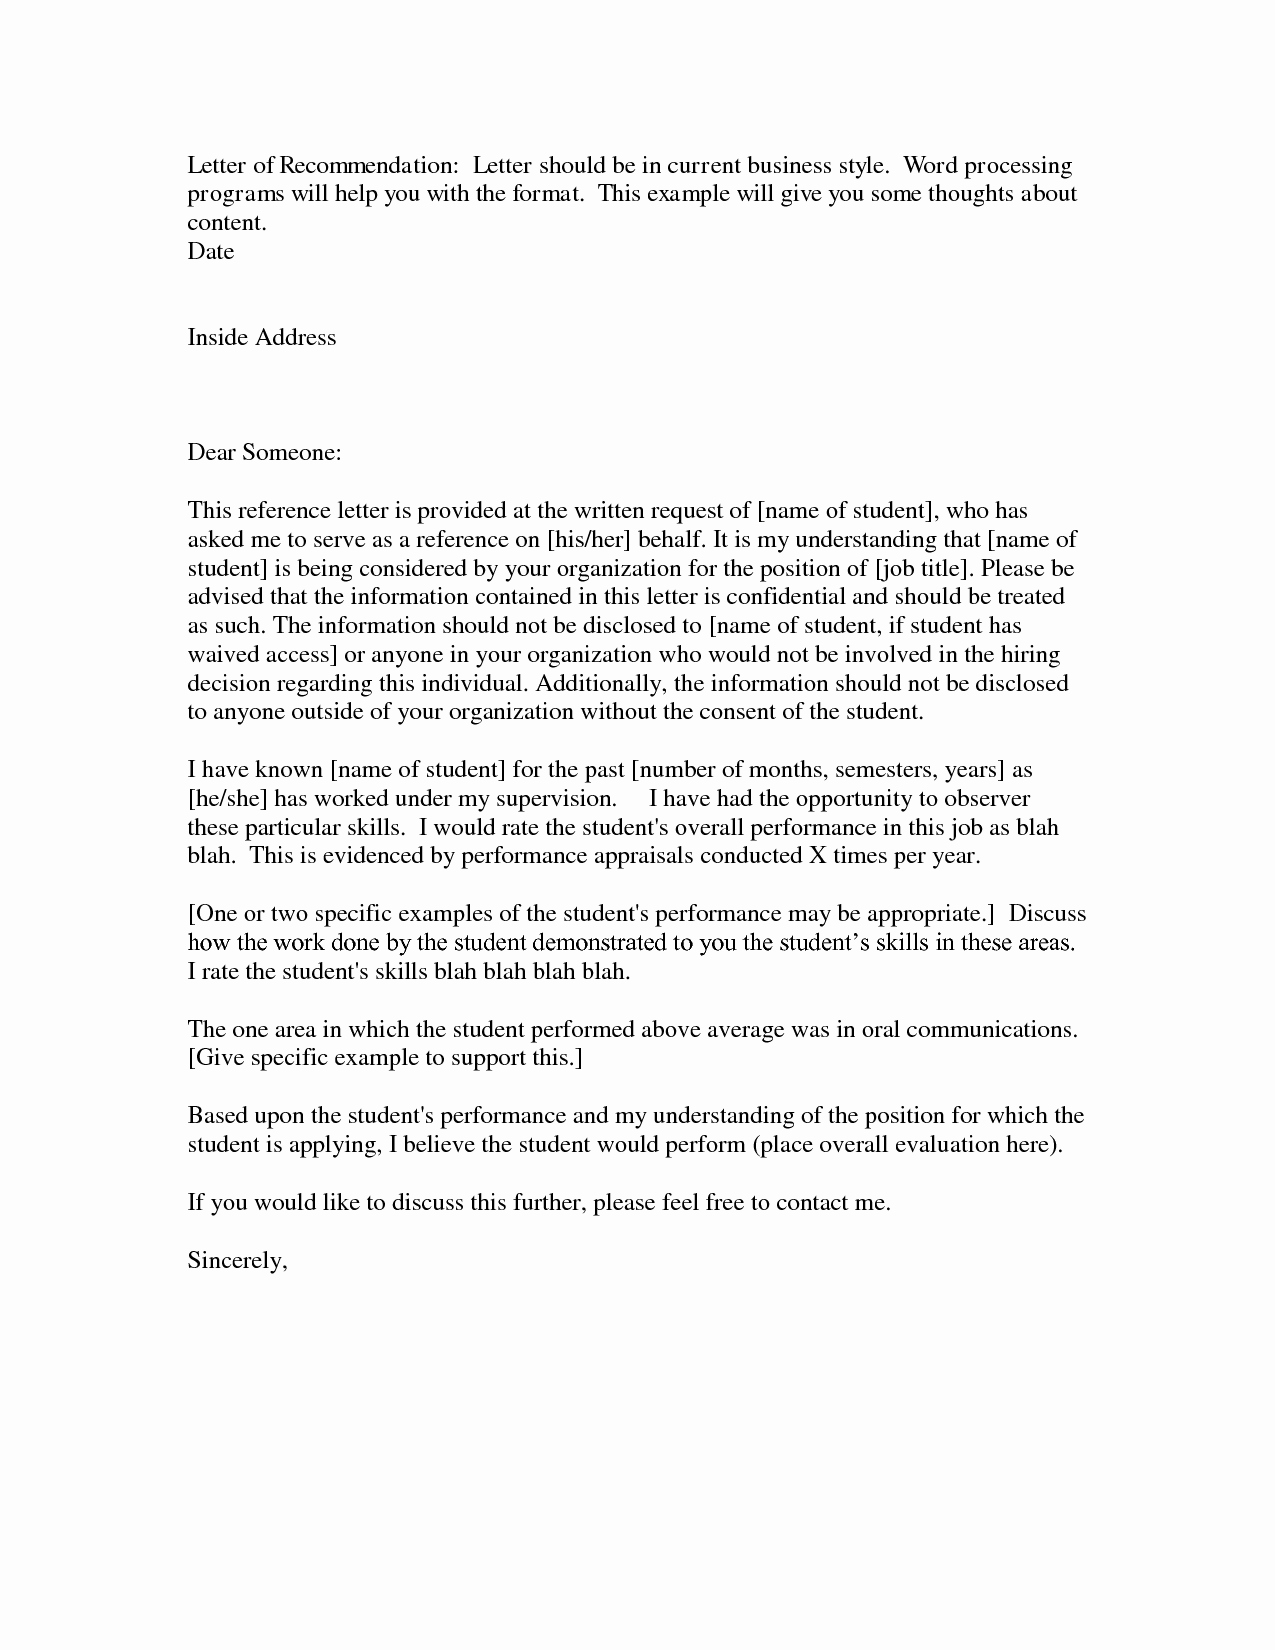 Template Of A Business Letter Fresh Business Reference Letter Template Example Mughals